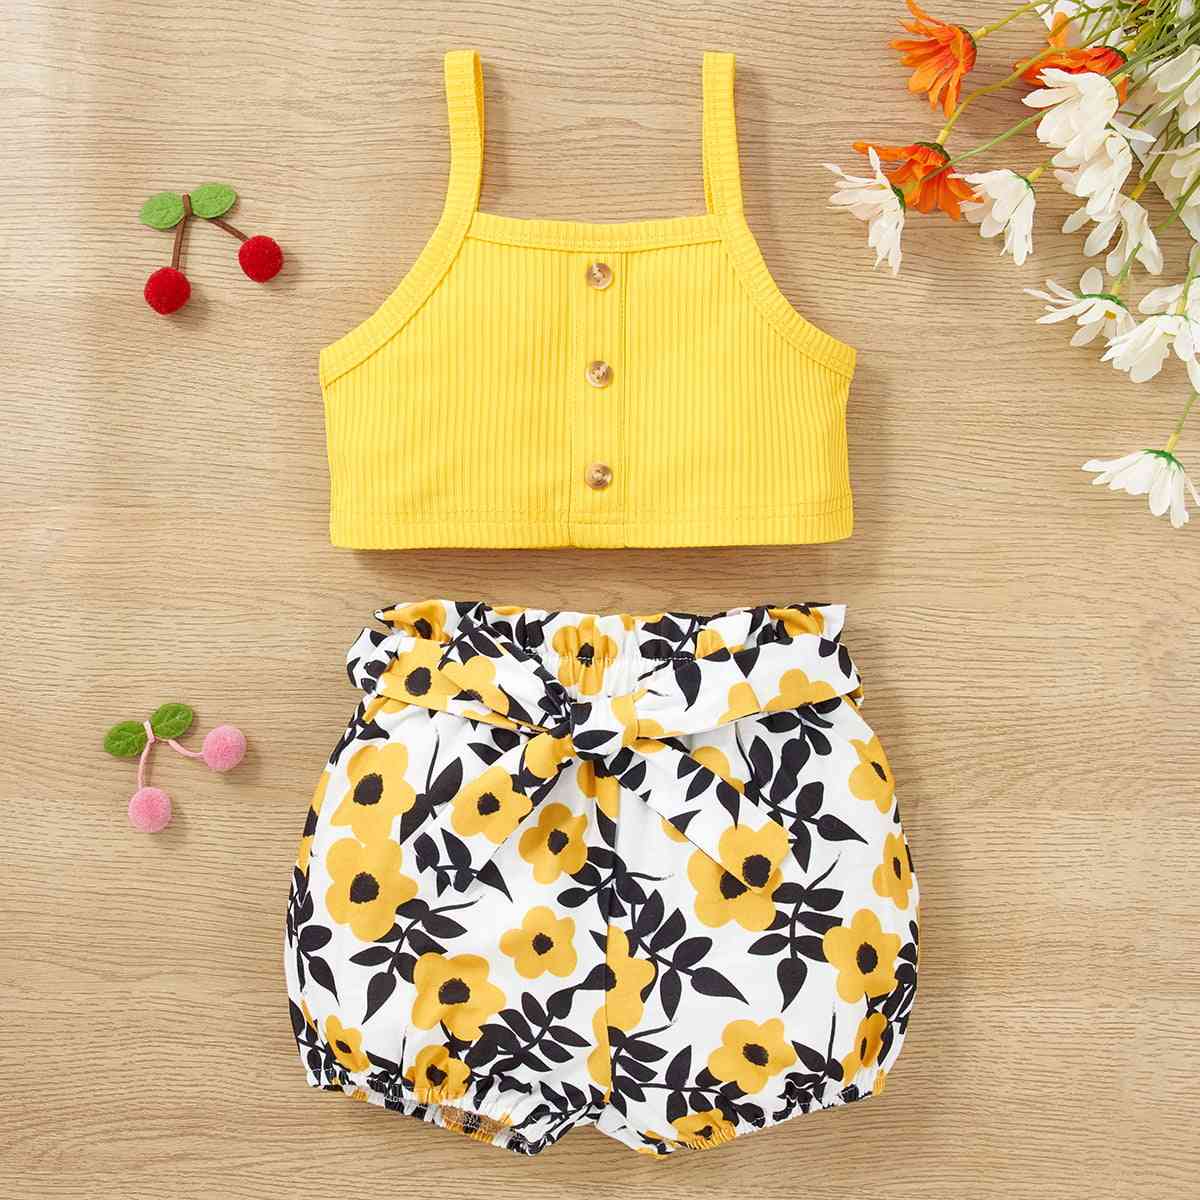 Decorative Button Tank and Floral Shorts Set